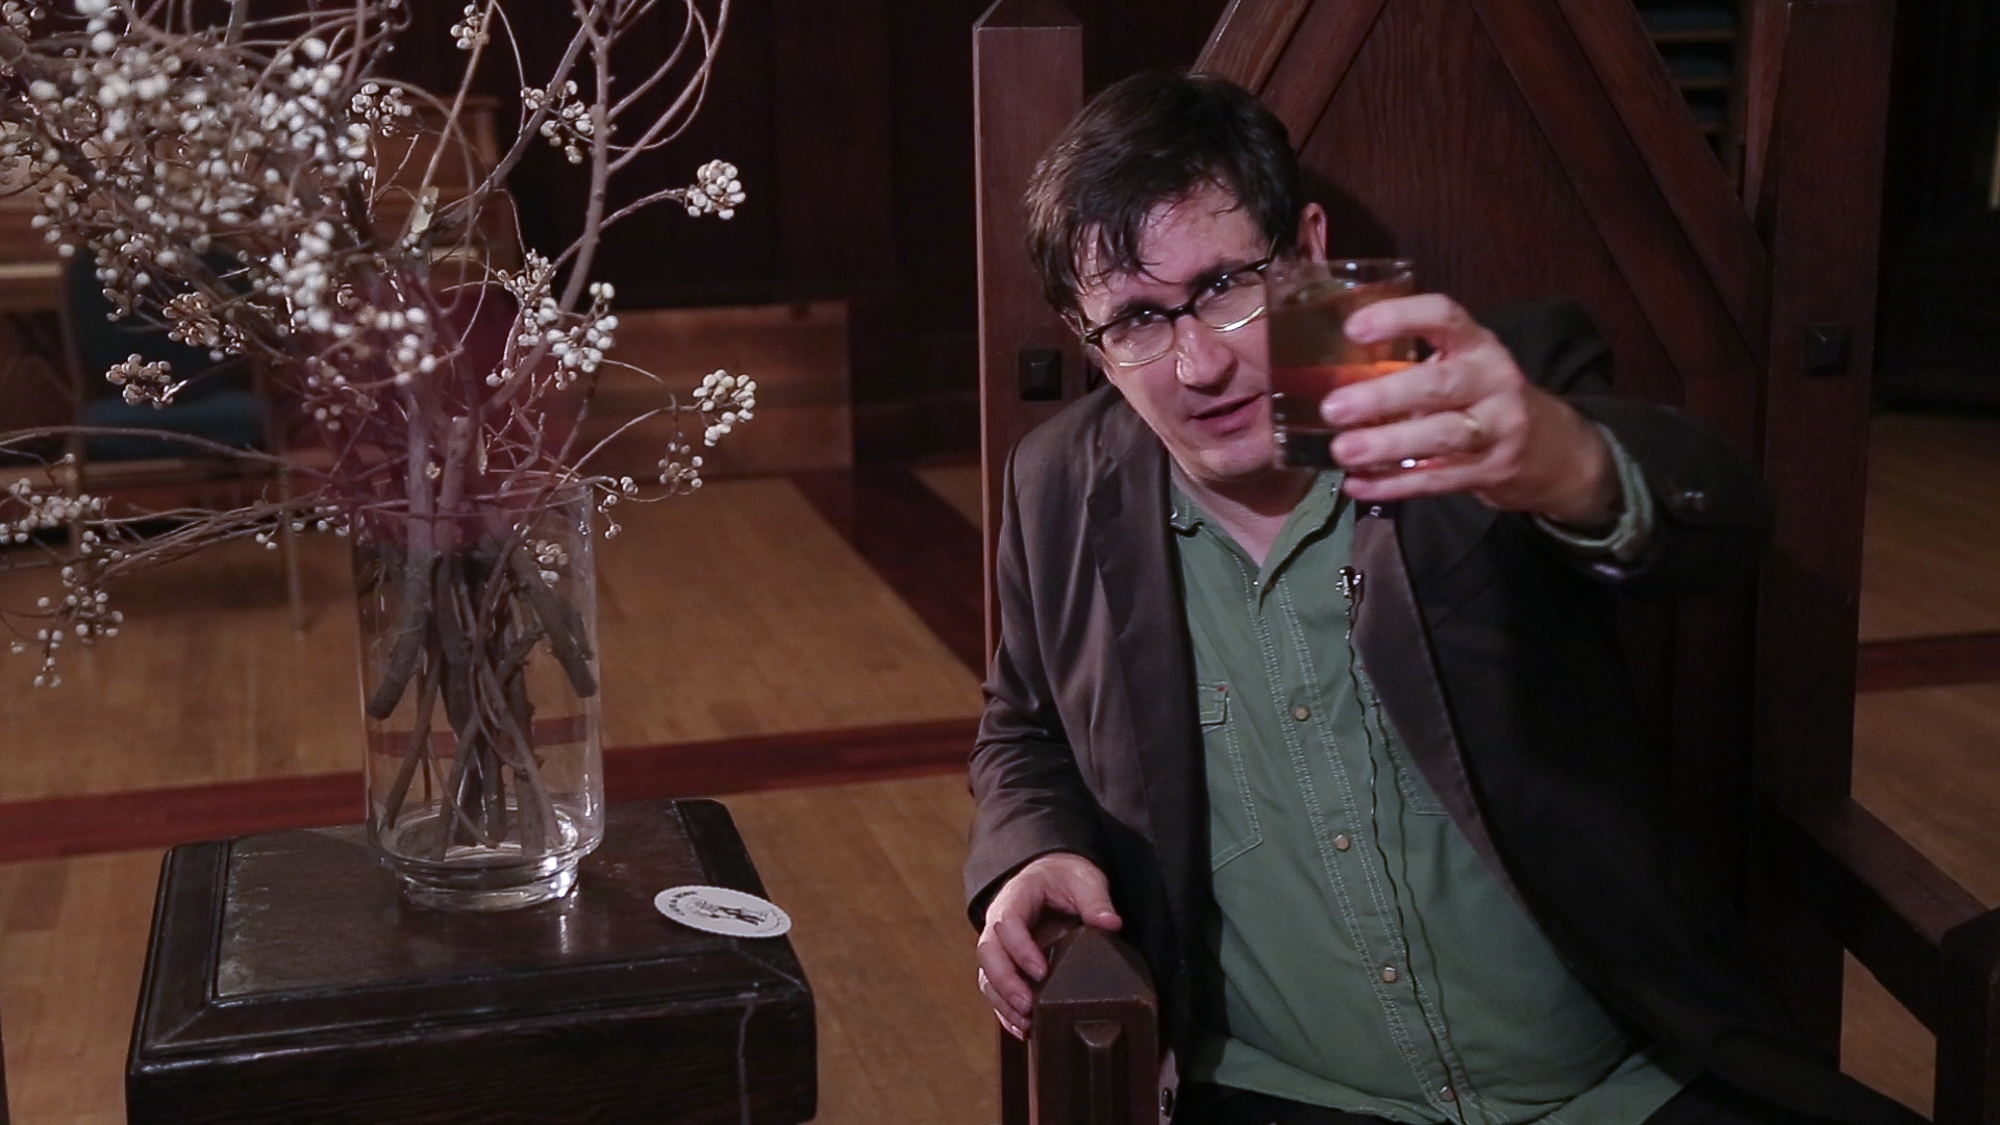 John Darnielle, of The Mountain Goats, toasting Windy of Aquarius, with a lovingly crafted Manhattan.